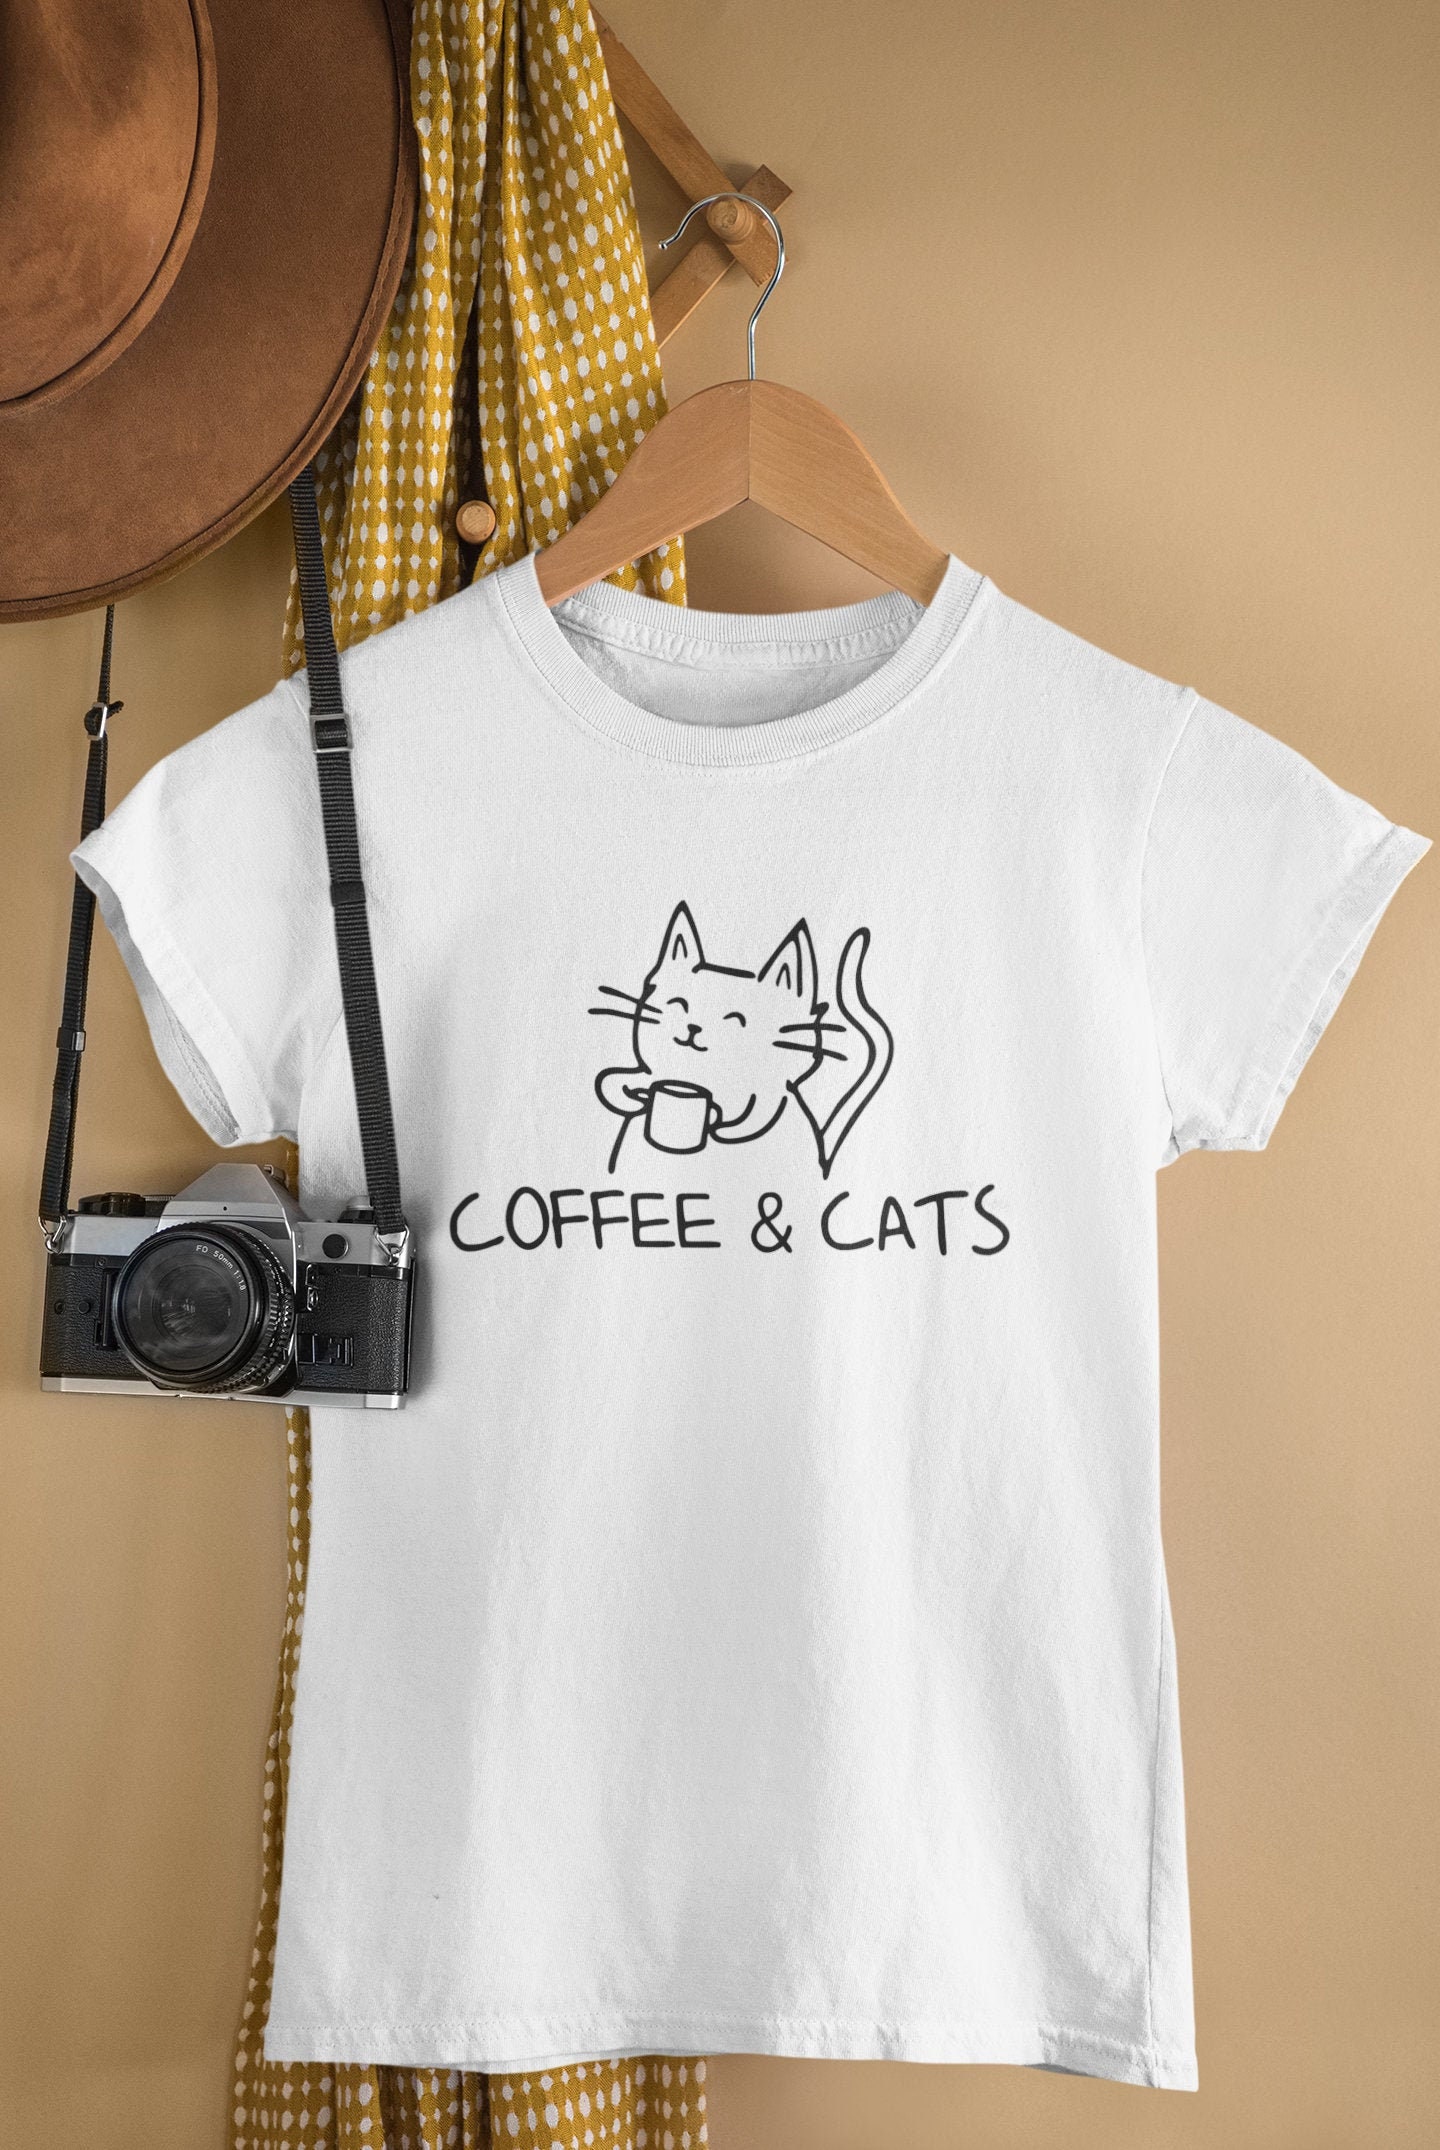 Coffee & Cats Tshirt/Funny Design Addict Coffee, Drinker Lover Starbucks Gift, Foodie Gift